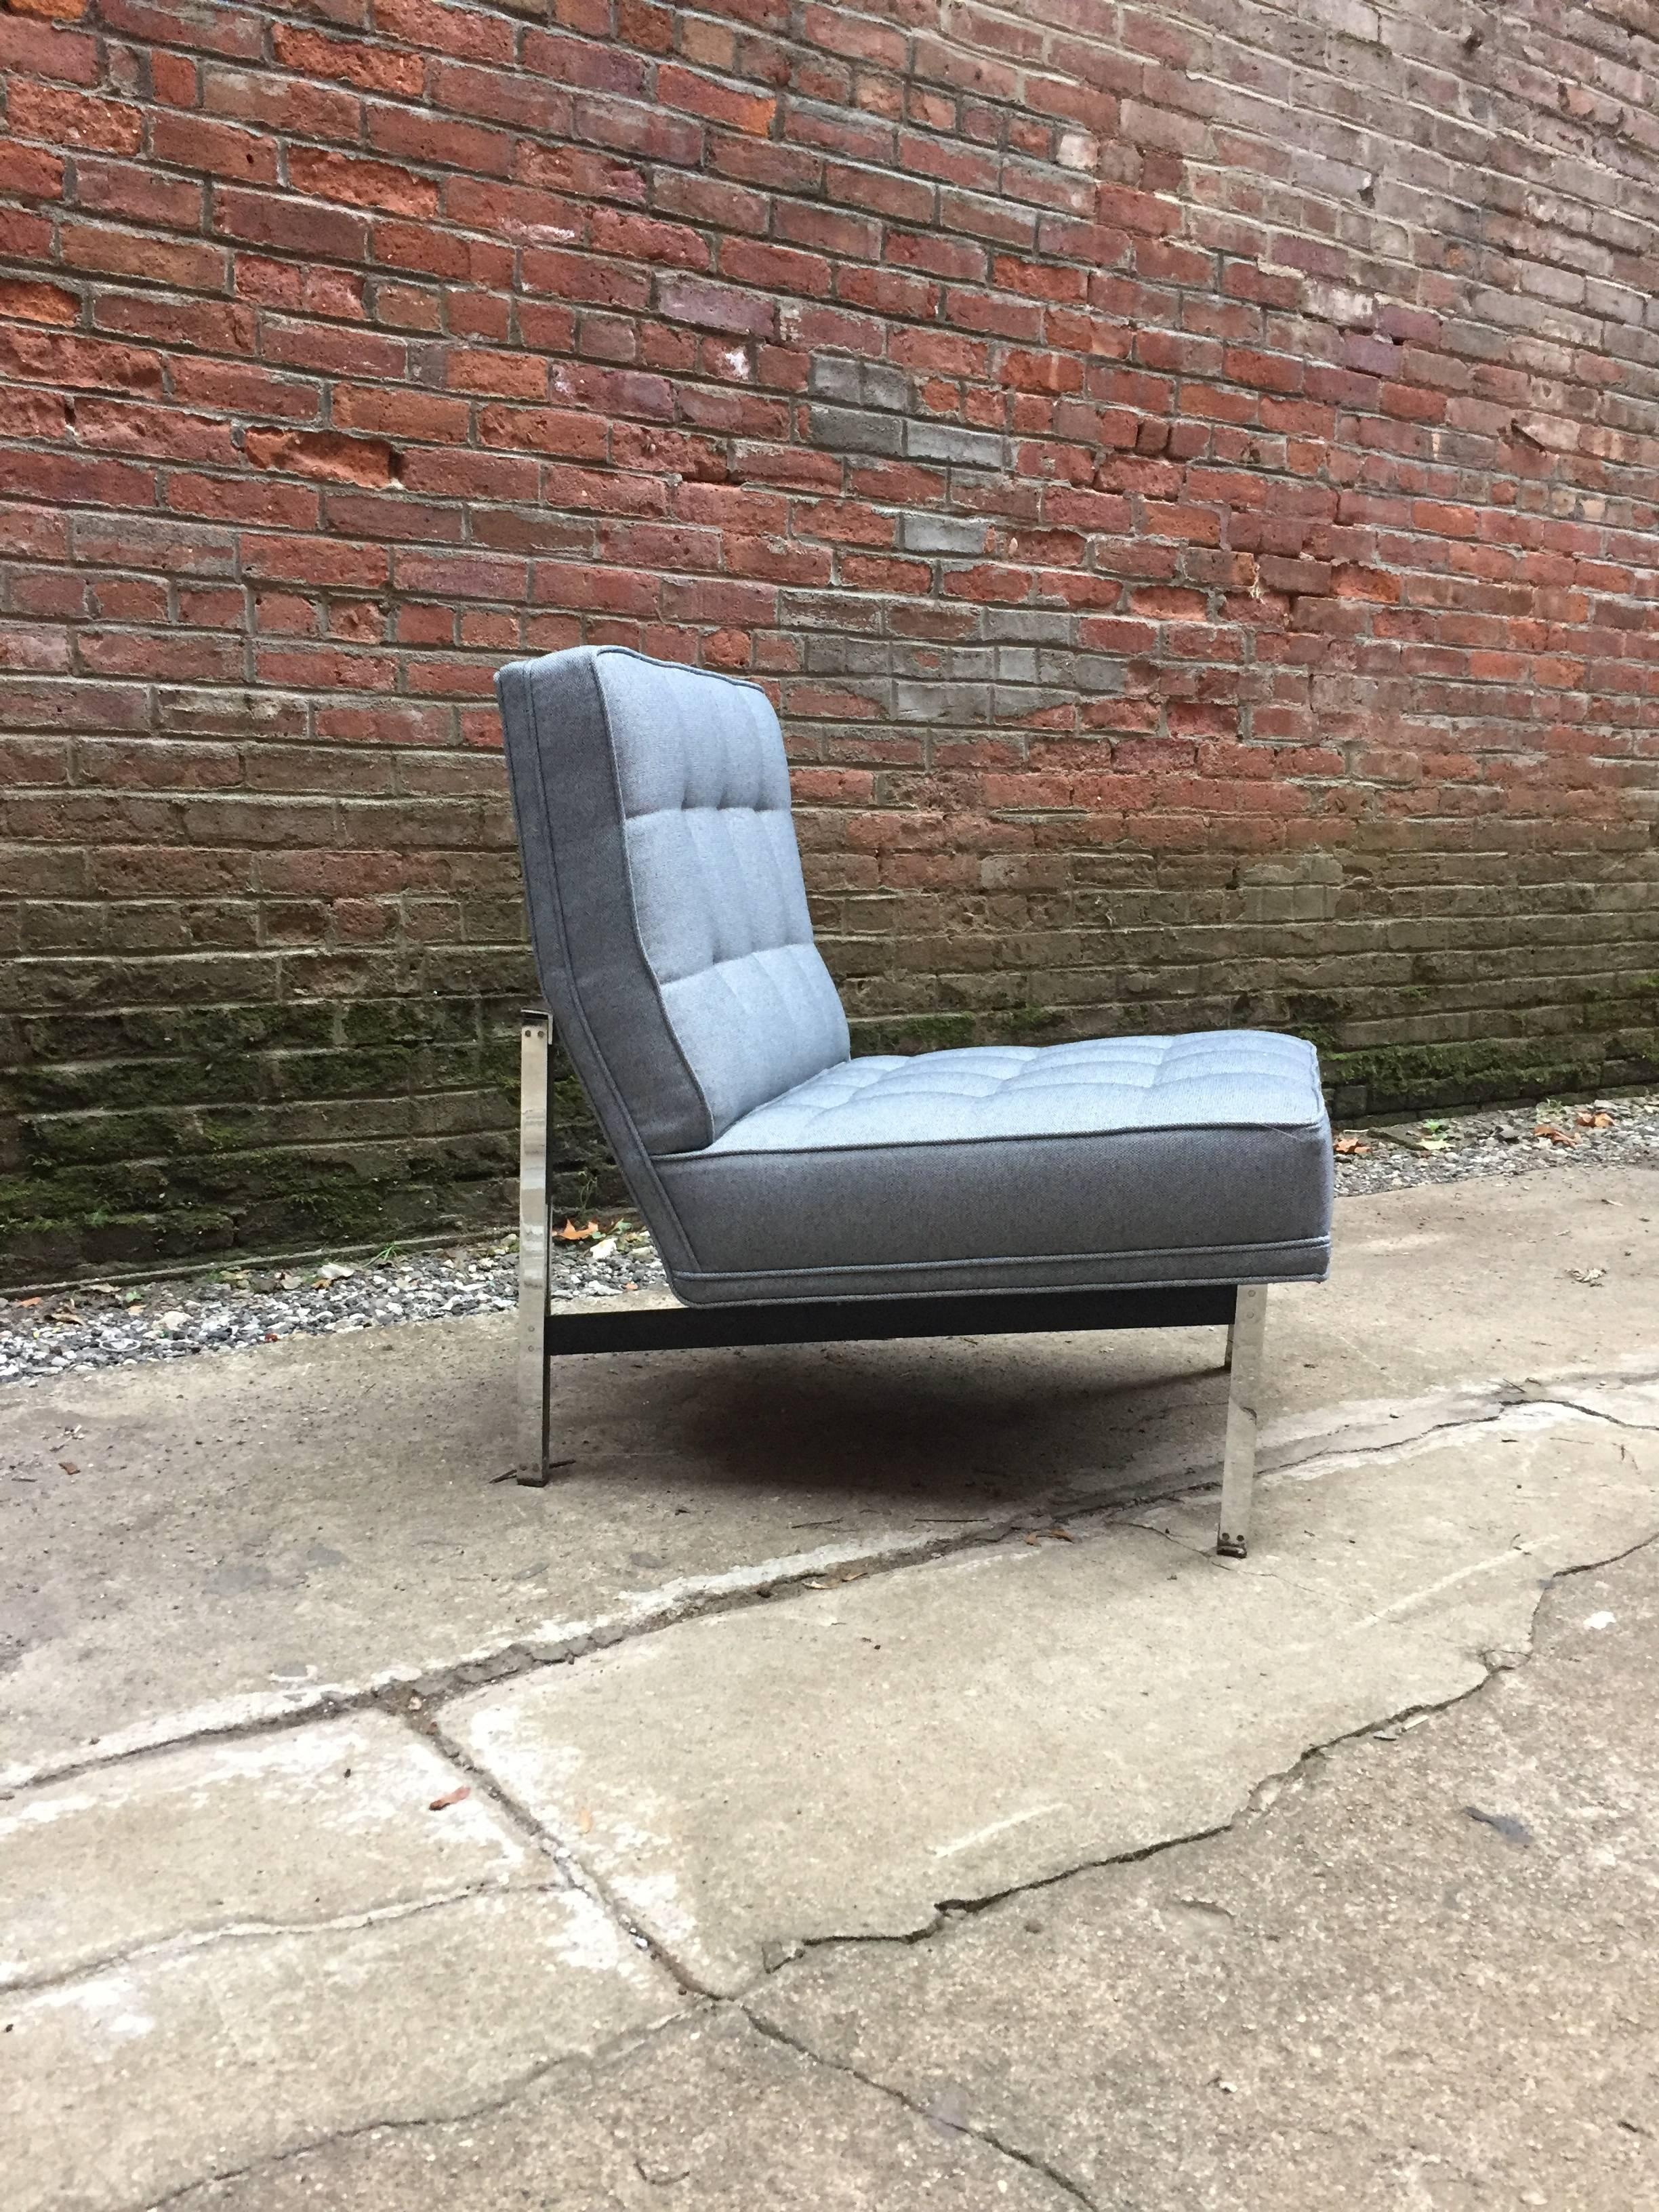 Freshly upholstered in a light gray Knoll fabric. Brushed chrome steel base with black finish. 

Measure: 24